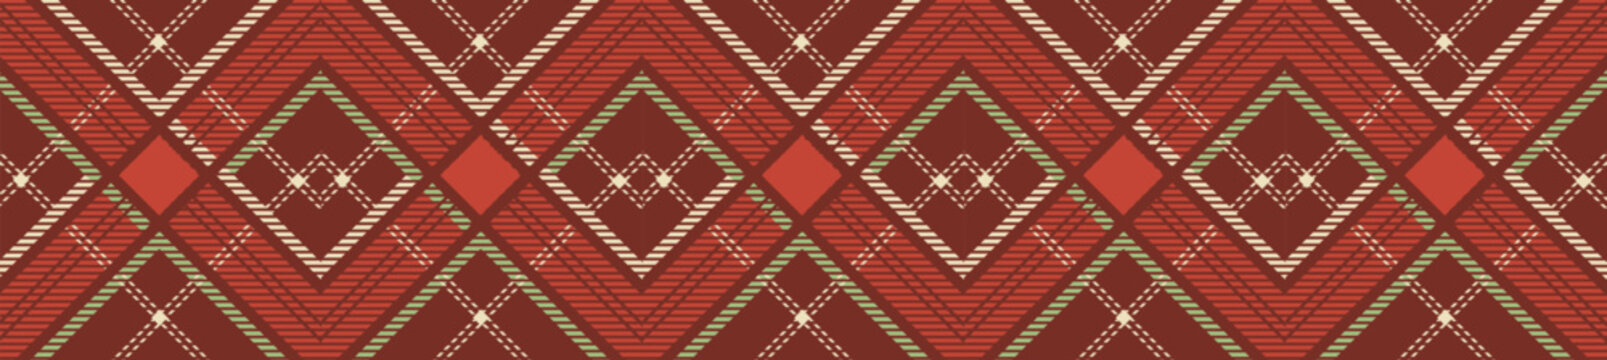 Red rhombus fabric lumberjack seamless pattern. Square ornament in classic tiled scottish style symbols stylish coloring of rustic shirt traditional geometric style vector.